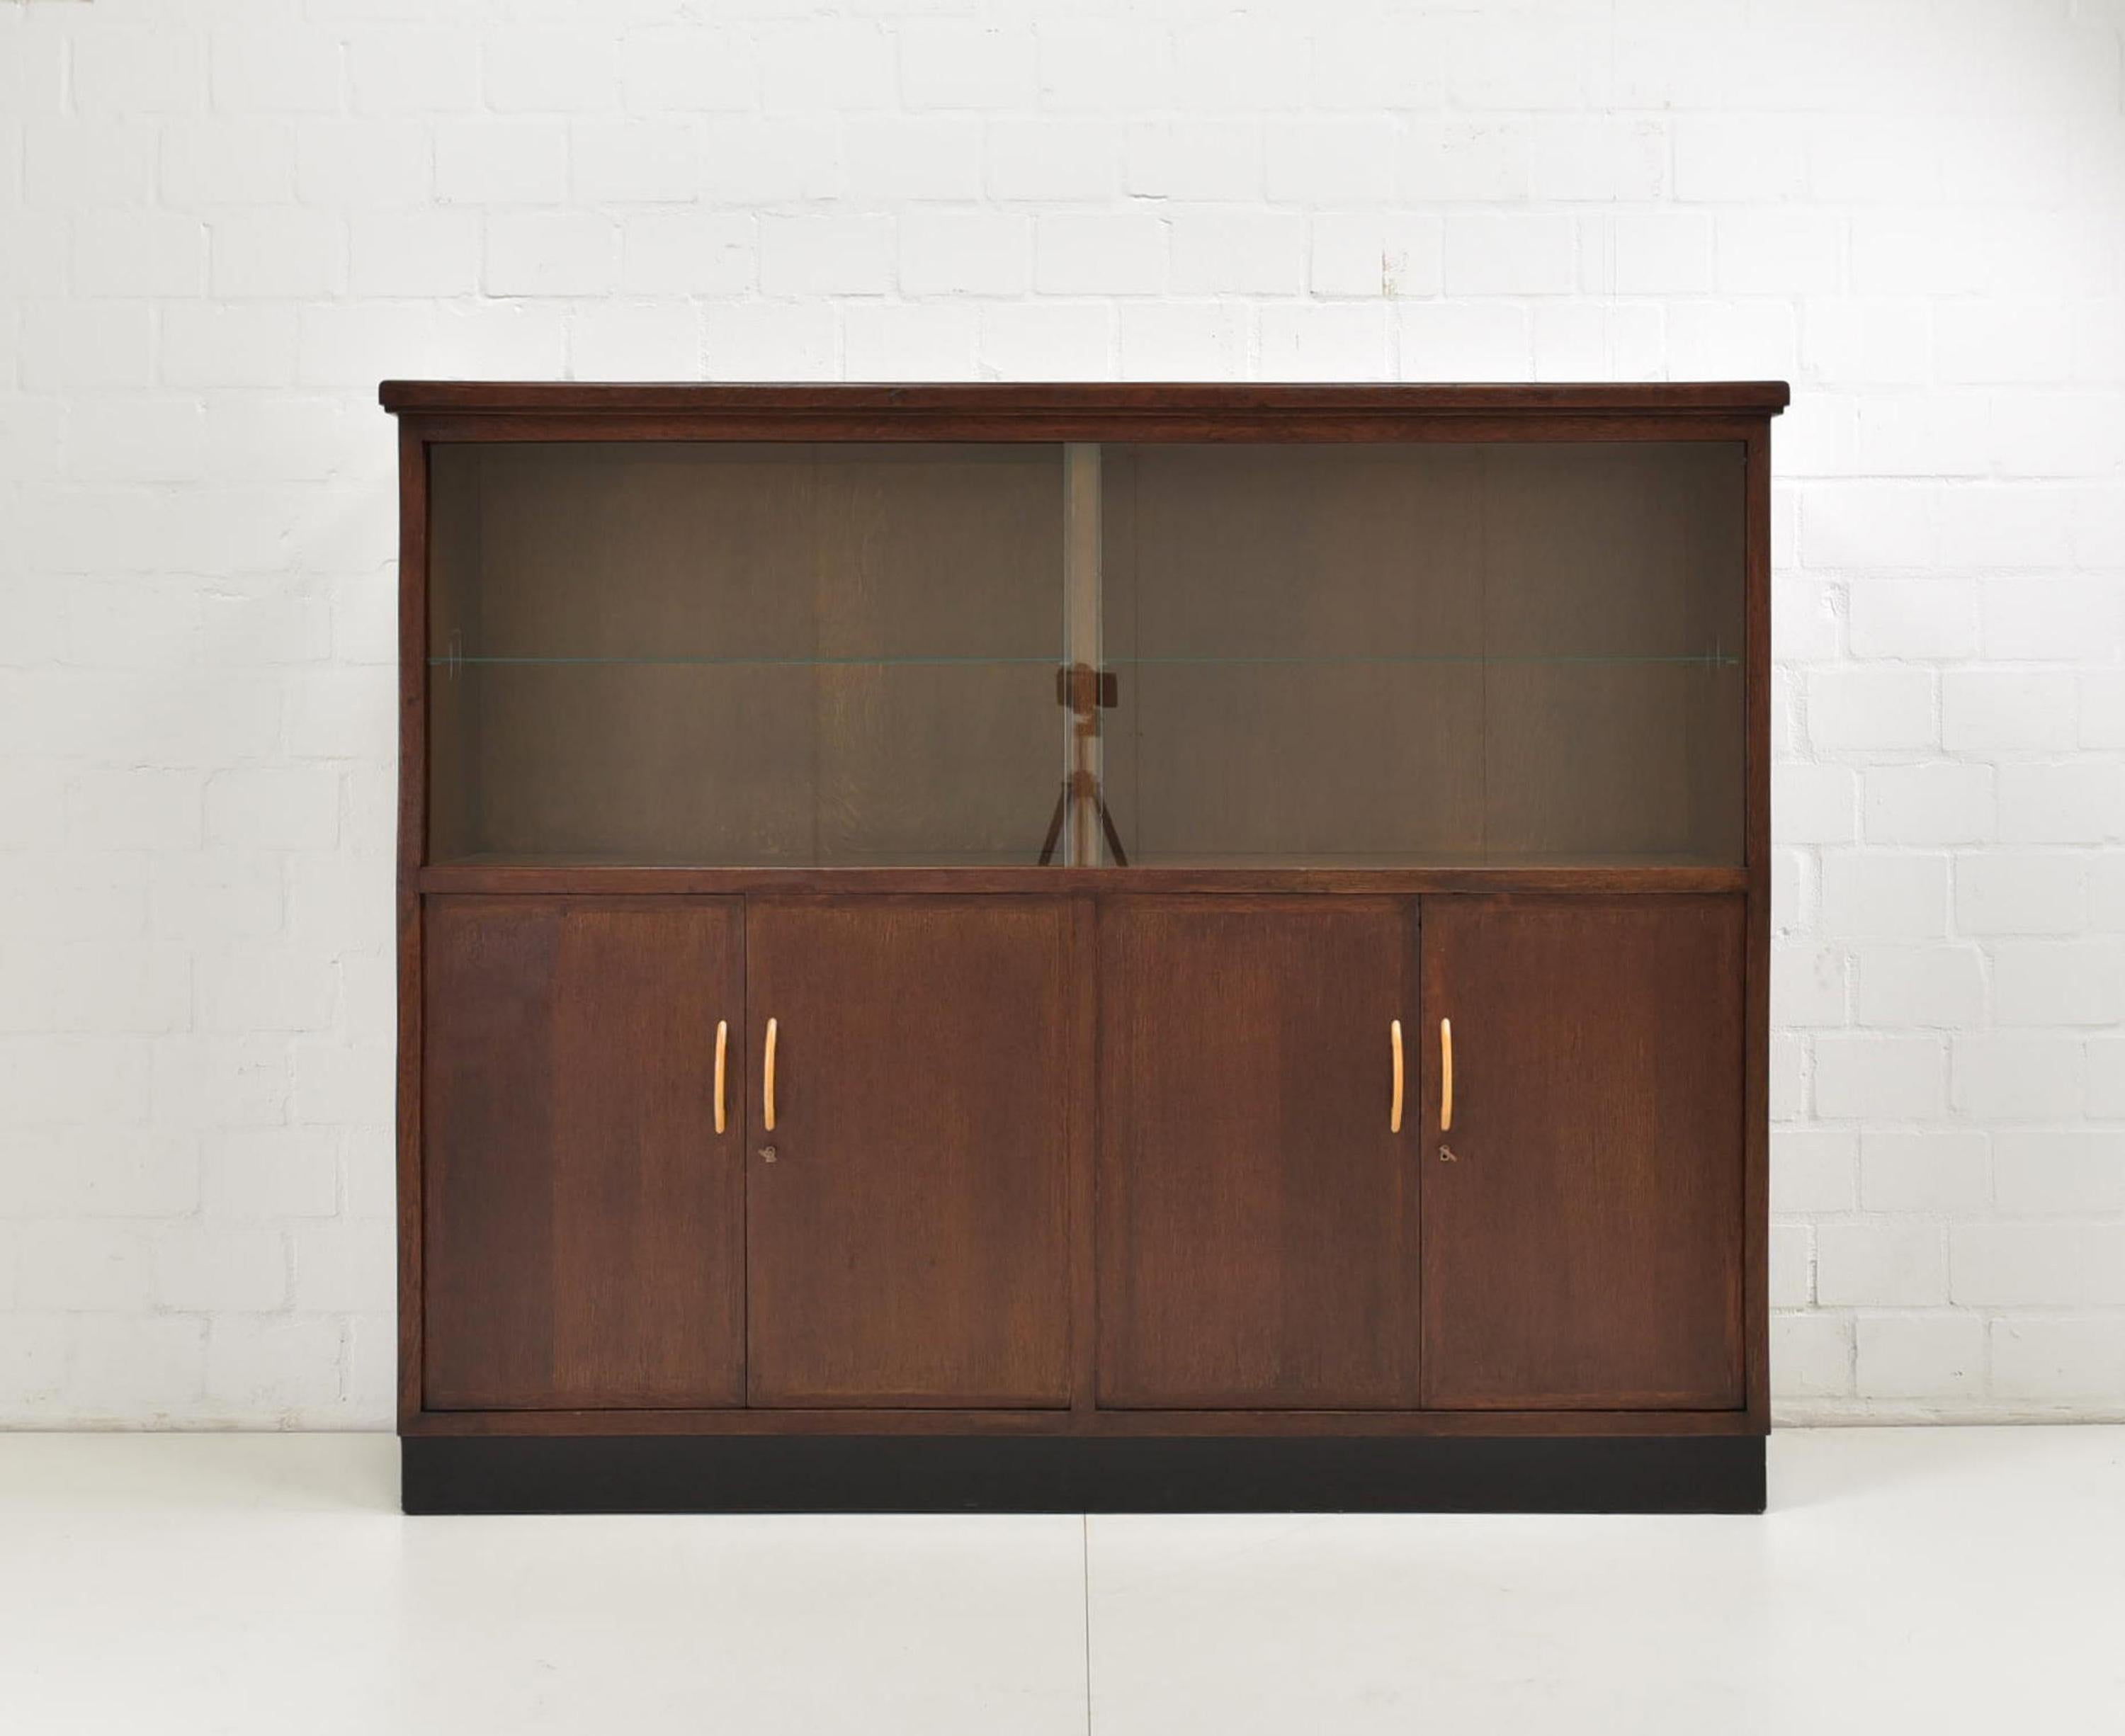 Display cabinet restored Art Deco / Bauhaus around 1940 Oak highboard

Features:
Model with 4 areas, each with a shelf
Showcase parts with glass sliding doors at the top four doors at the bottom
Geometric shape
Black base
Timeless, functional